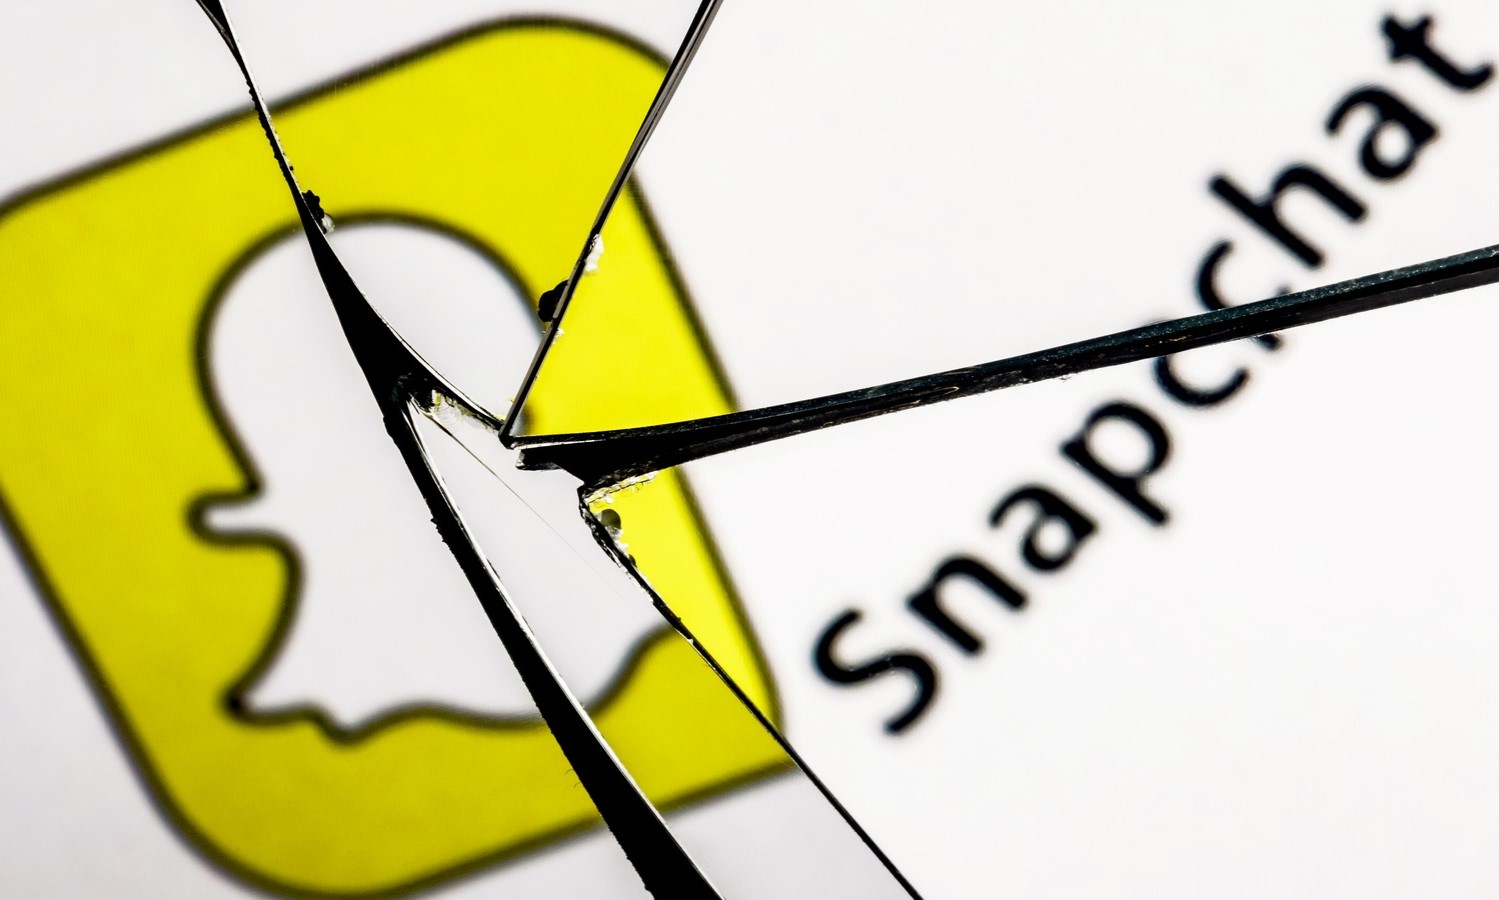 The Shocking Truth: Your Private Snapchat Photos Could Be Leaked!